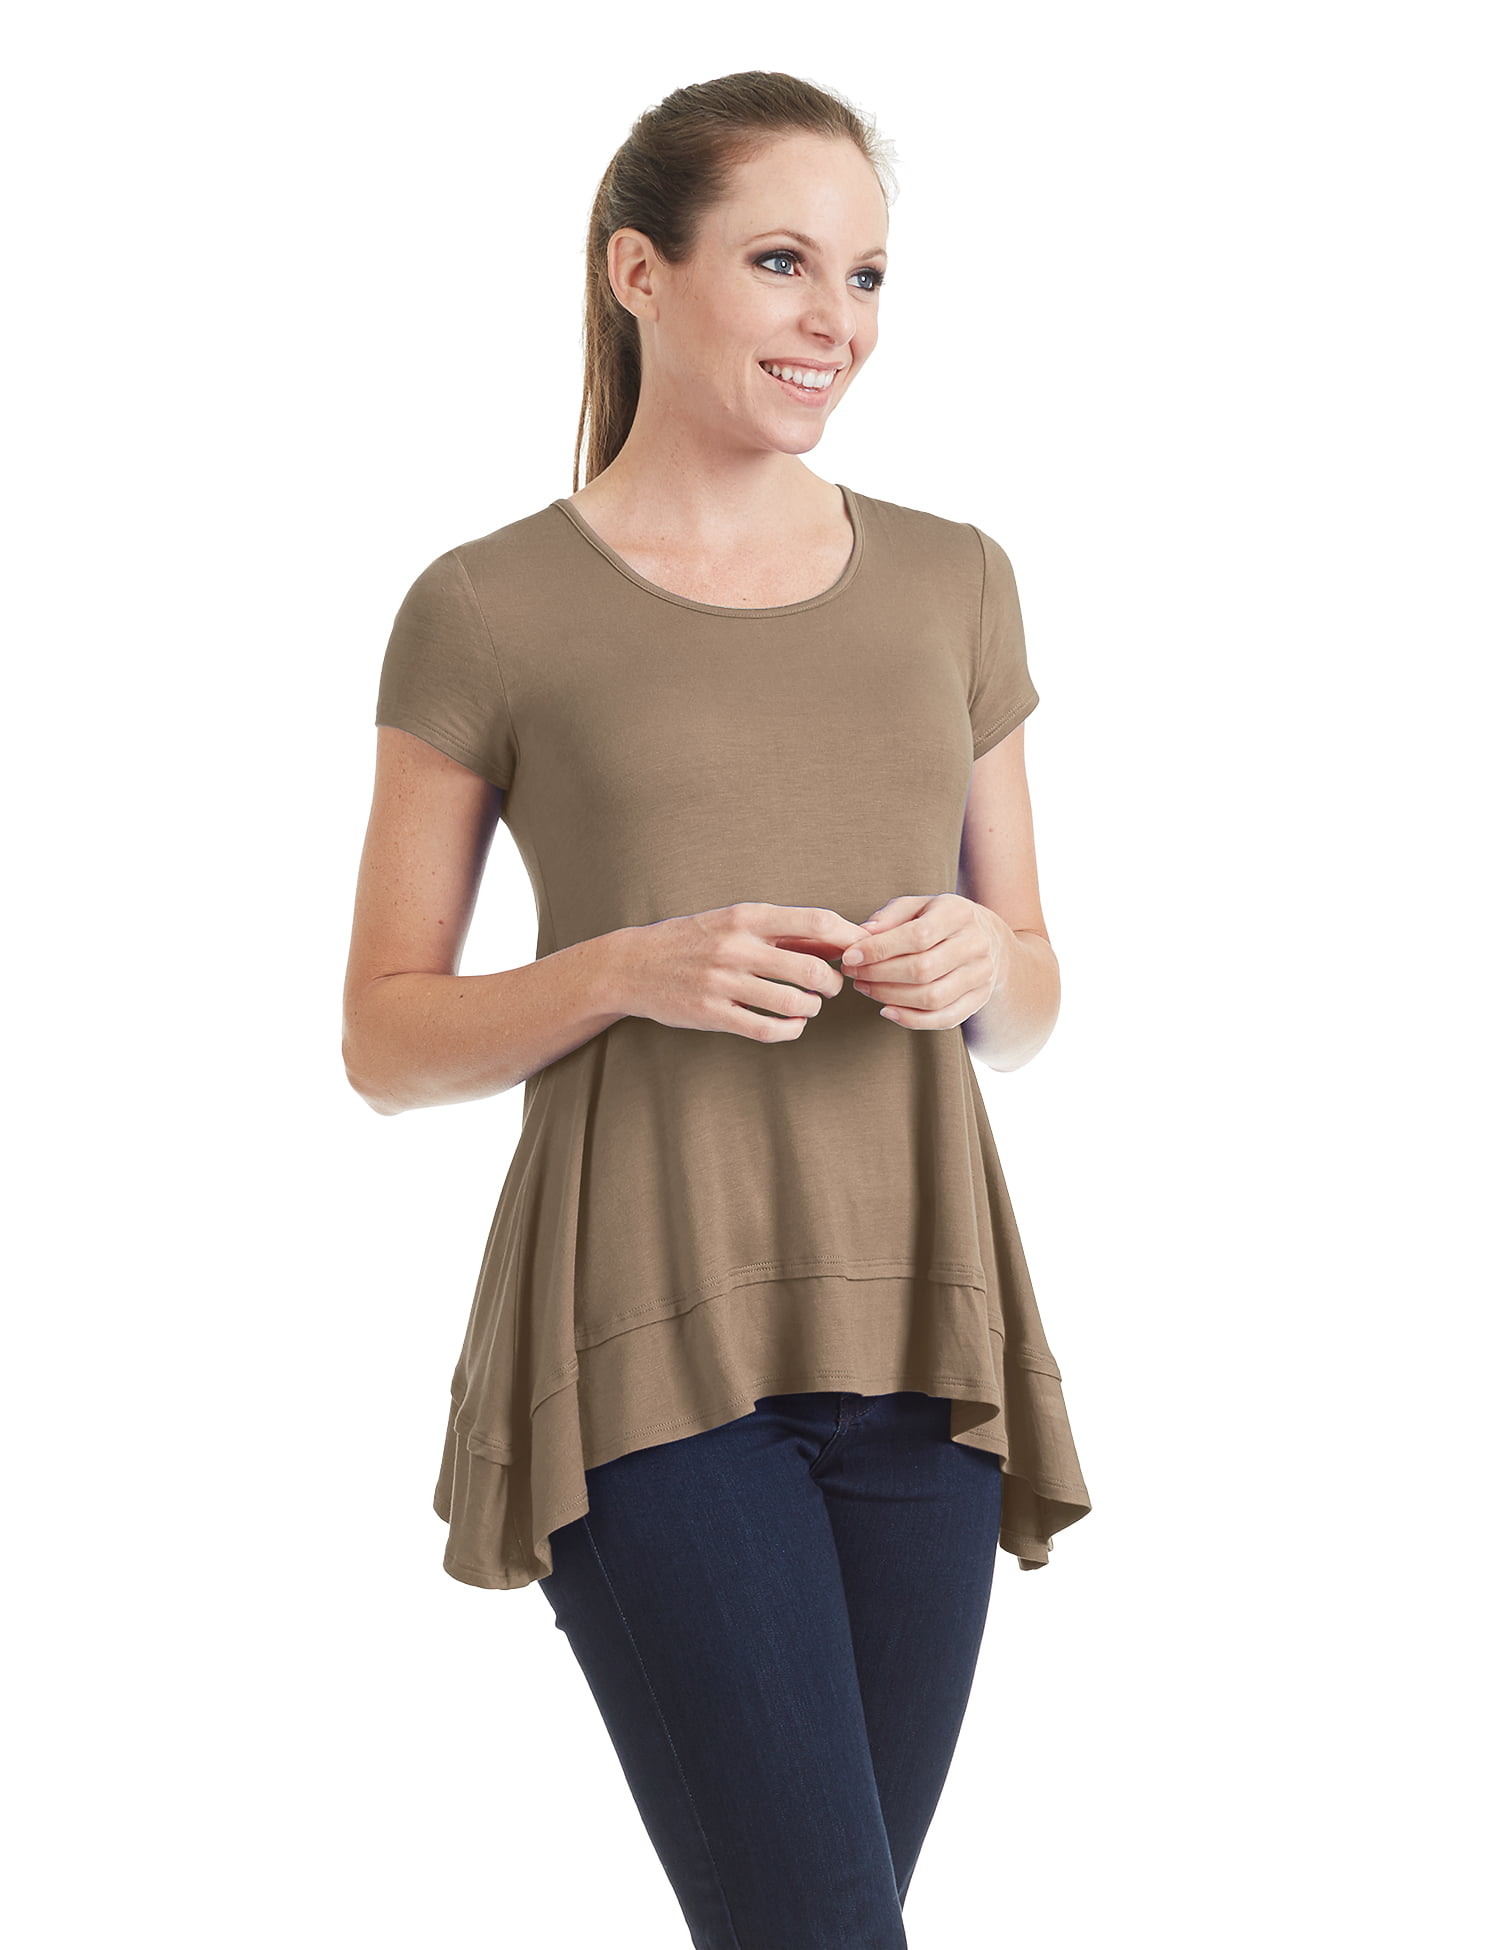 WT1189 Womens Short Sleeve Double Layer Tunic Top S Taupe - Walmart.com